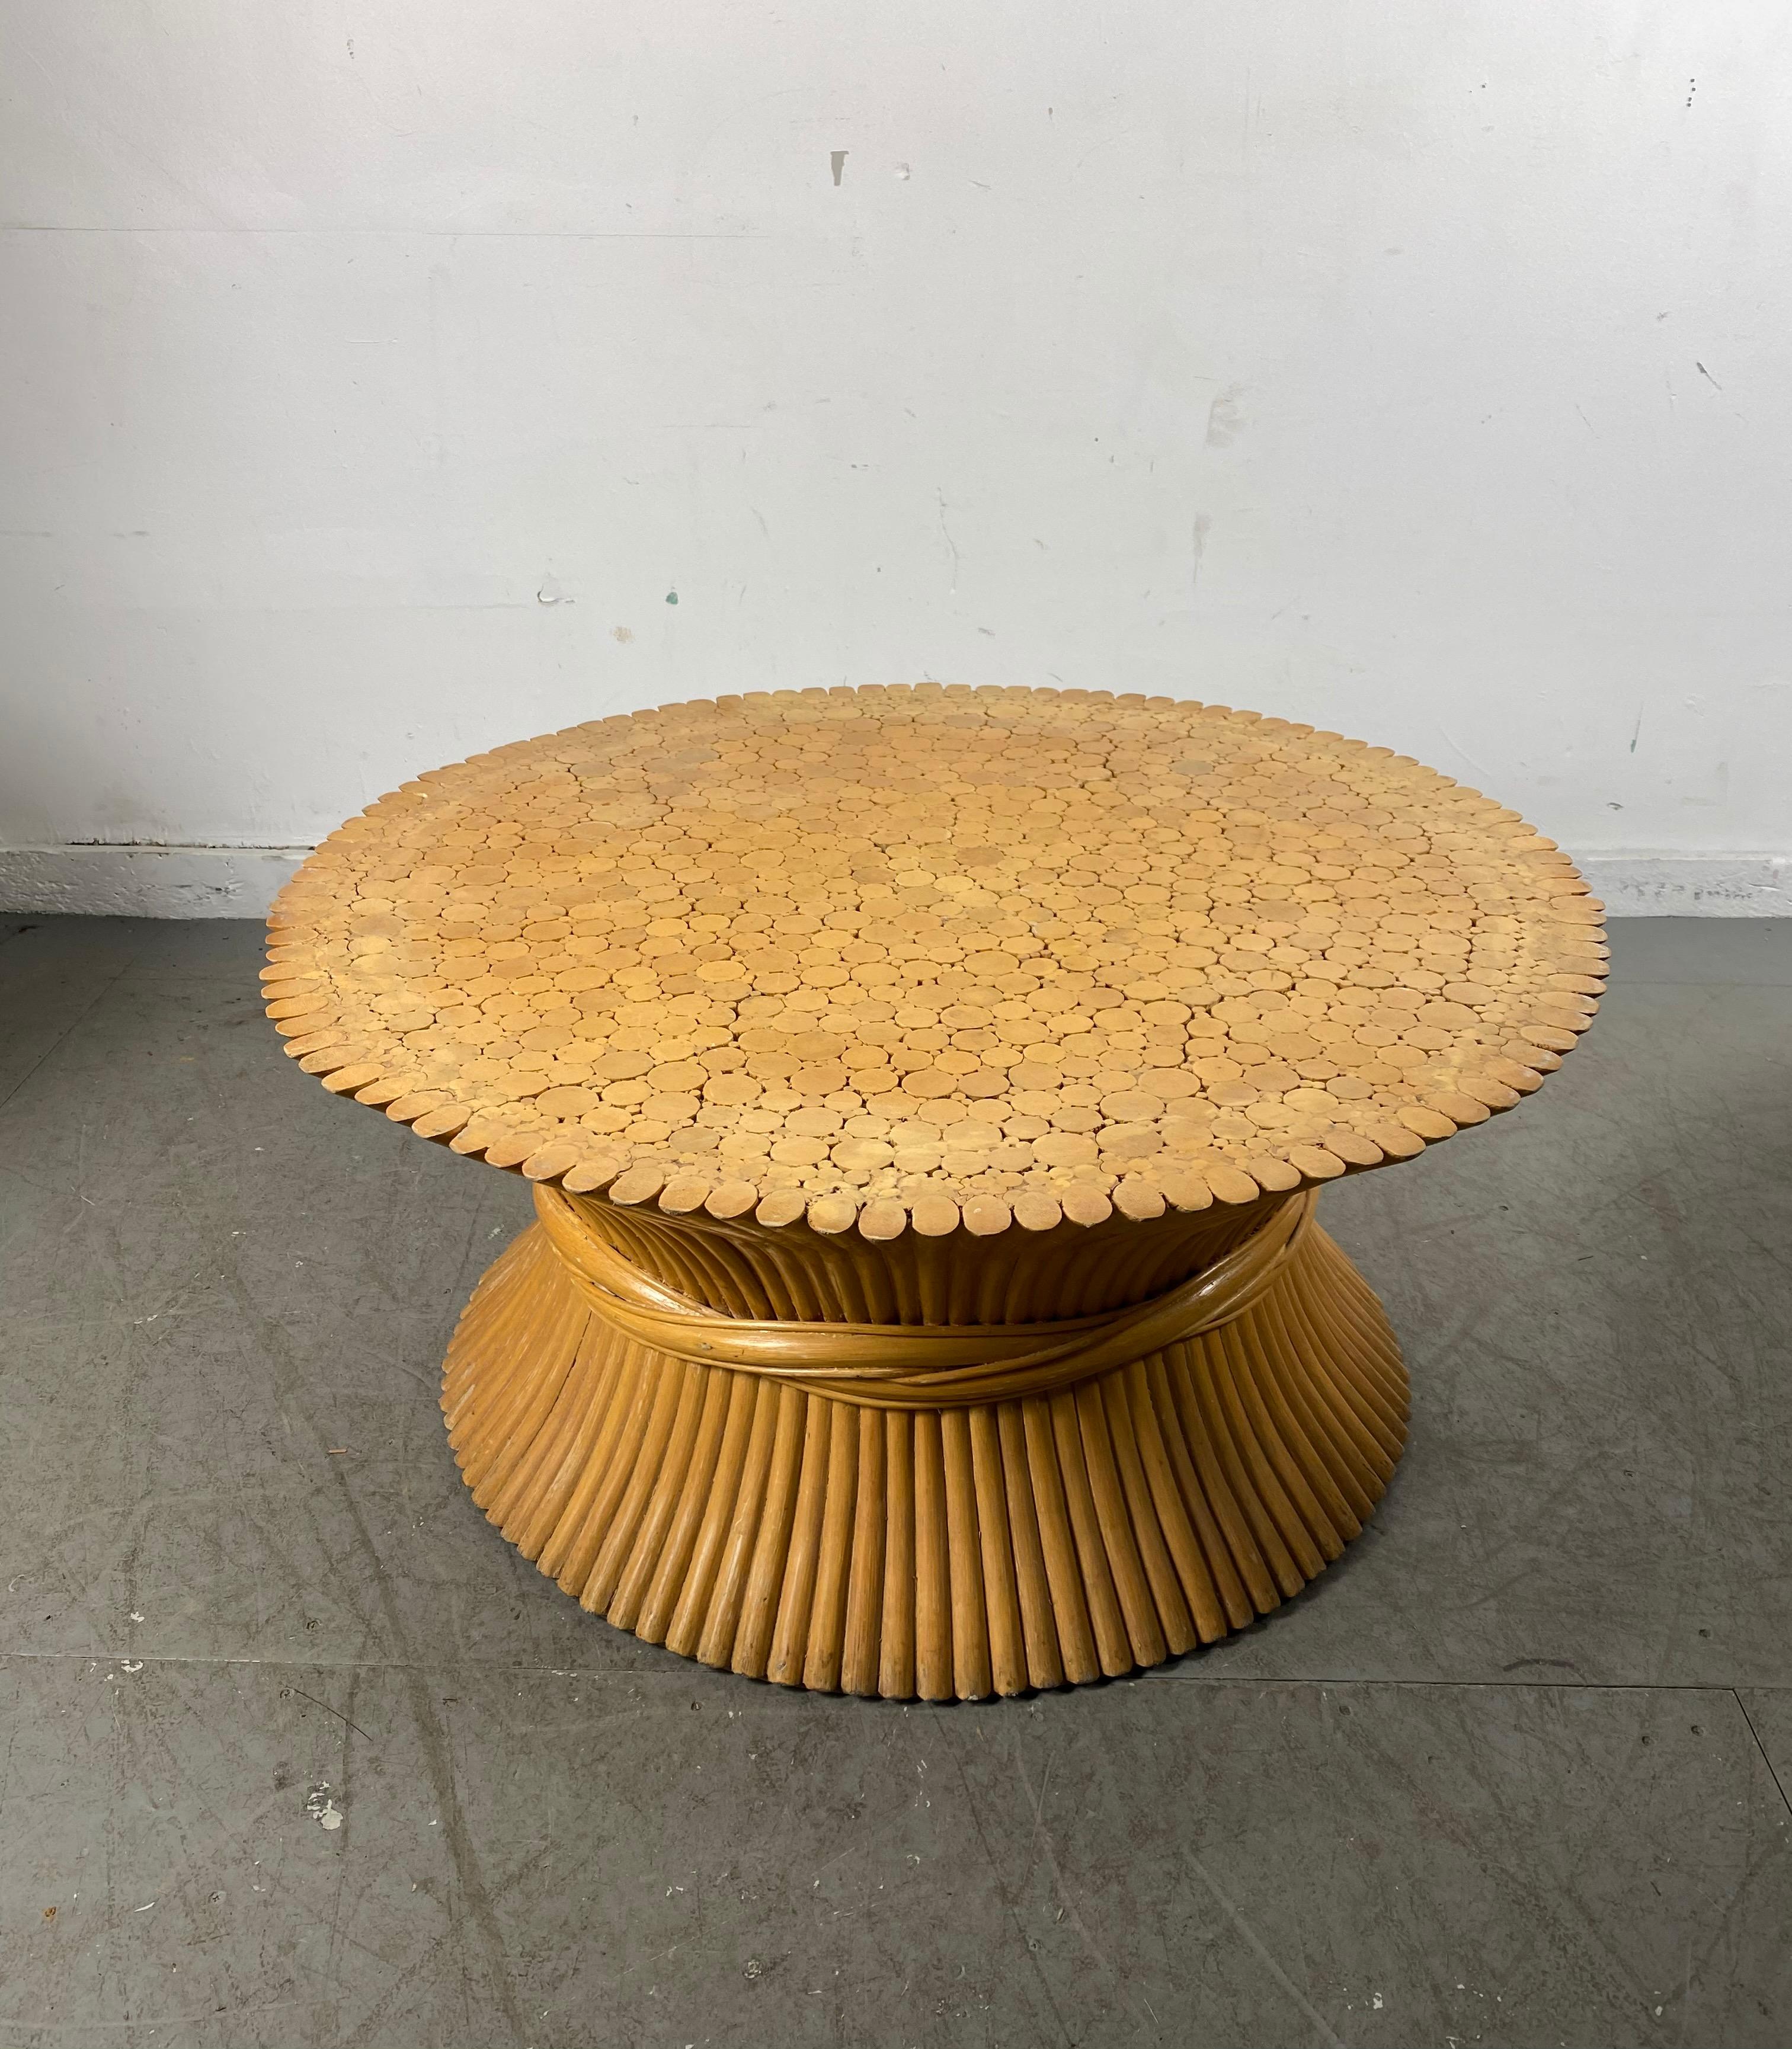 Classic Mid-Century Modernist, Hollywood Regency coffee / cocktail table by McGuire of San Francisco. Beautiful bundle of wheat form constructed of bamboo, age appropriate wear. Hand delivery avail to New York City or anywhere en route from Buffalo